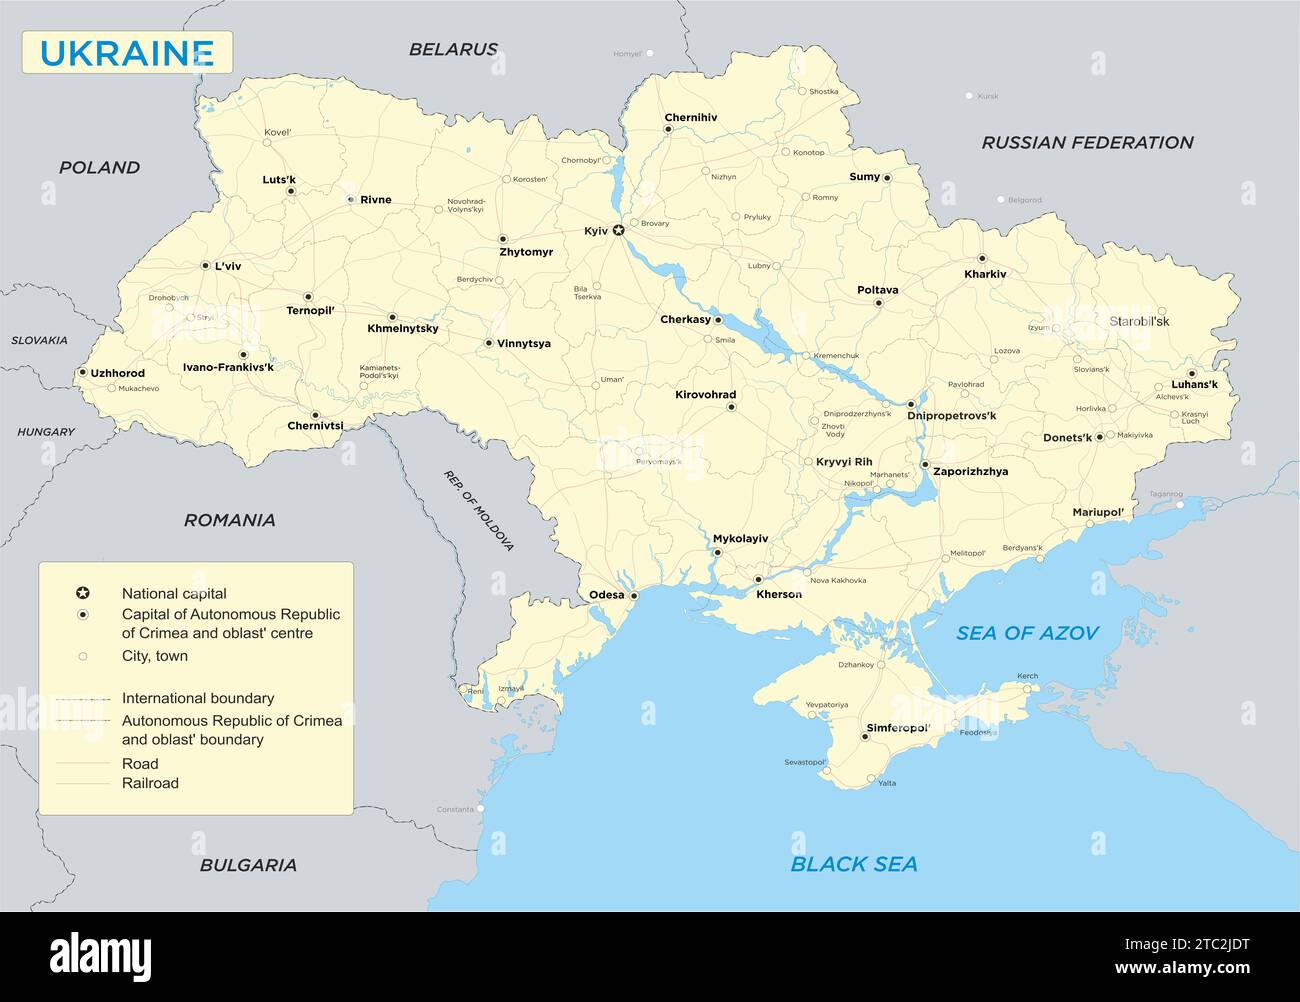 Detailed map of Ukraine with cities, roads, rivers, regions. Stock Photo